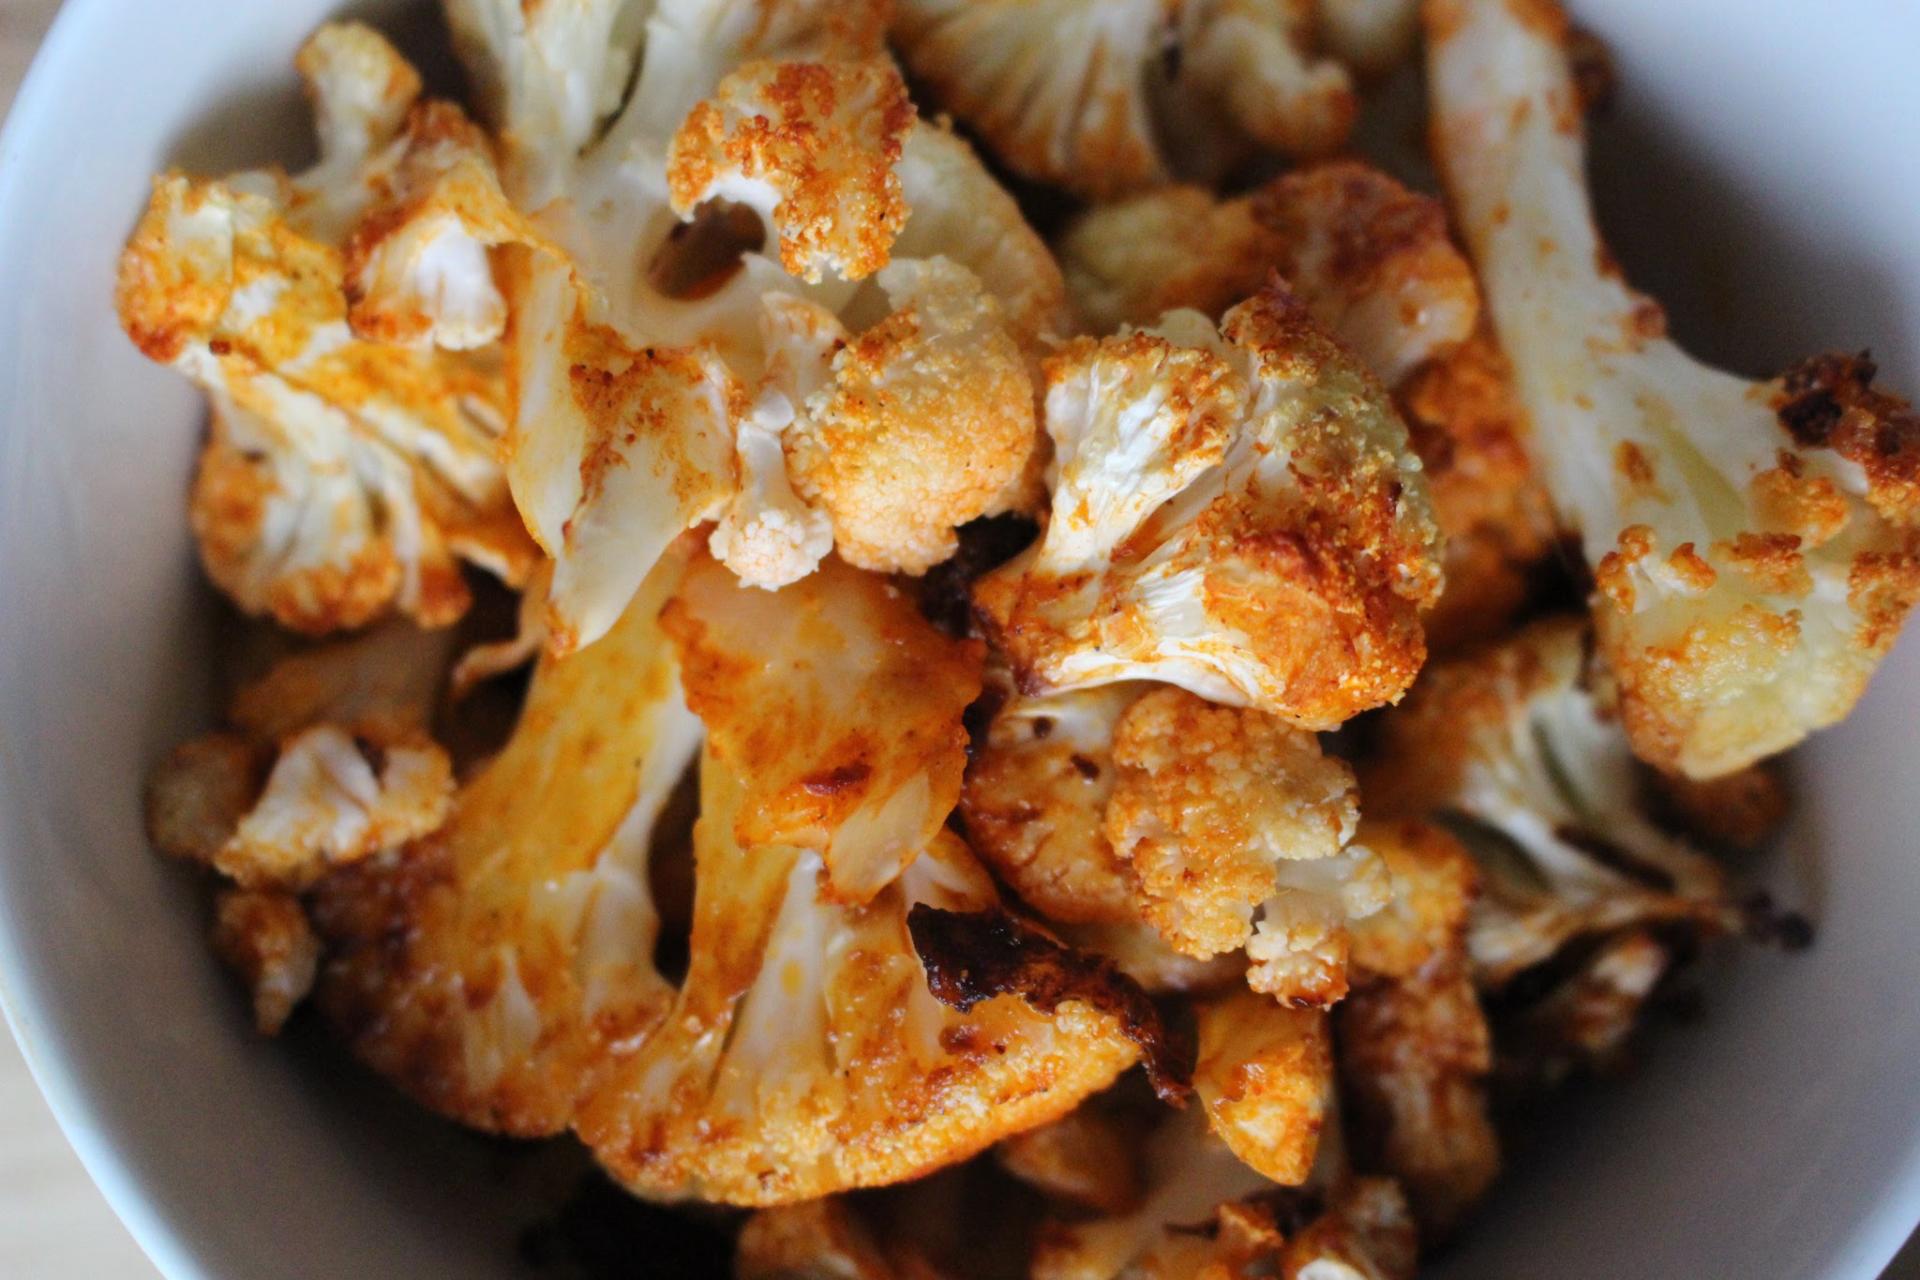 Buffalo Roasted Cauliflower by popular New Jersey foodie blogger What's For Dinner Esq.